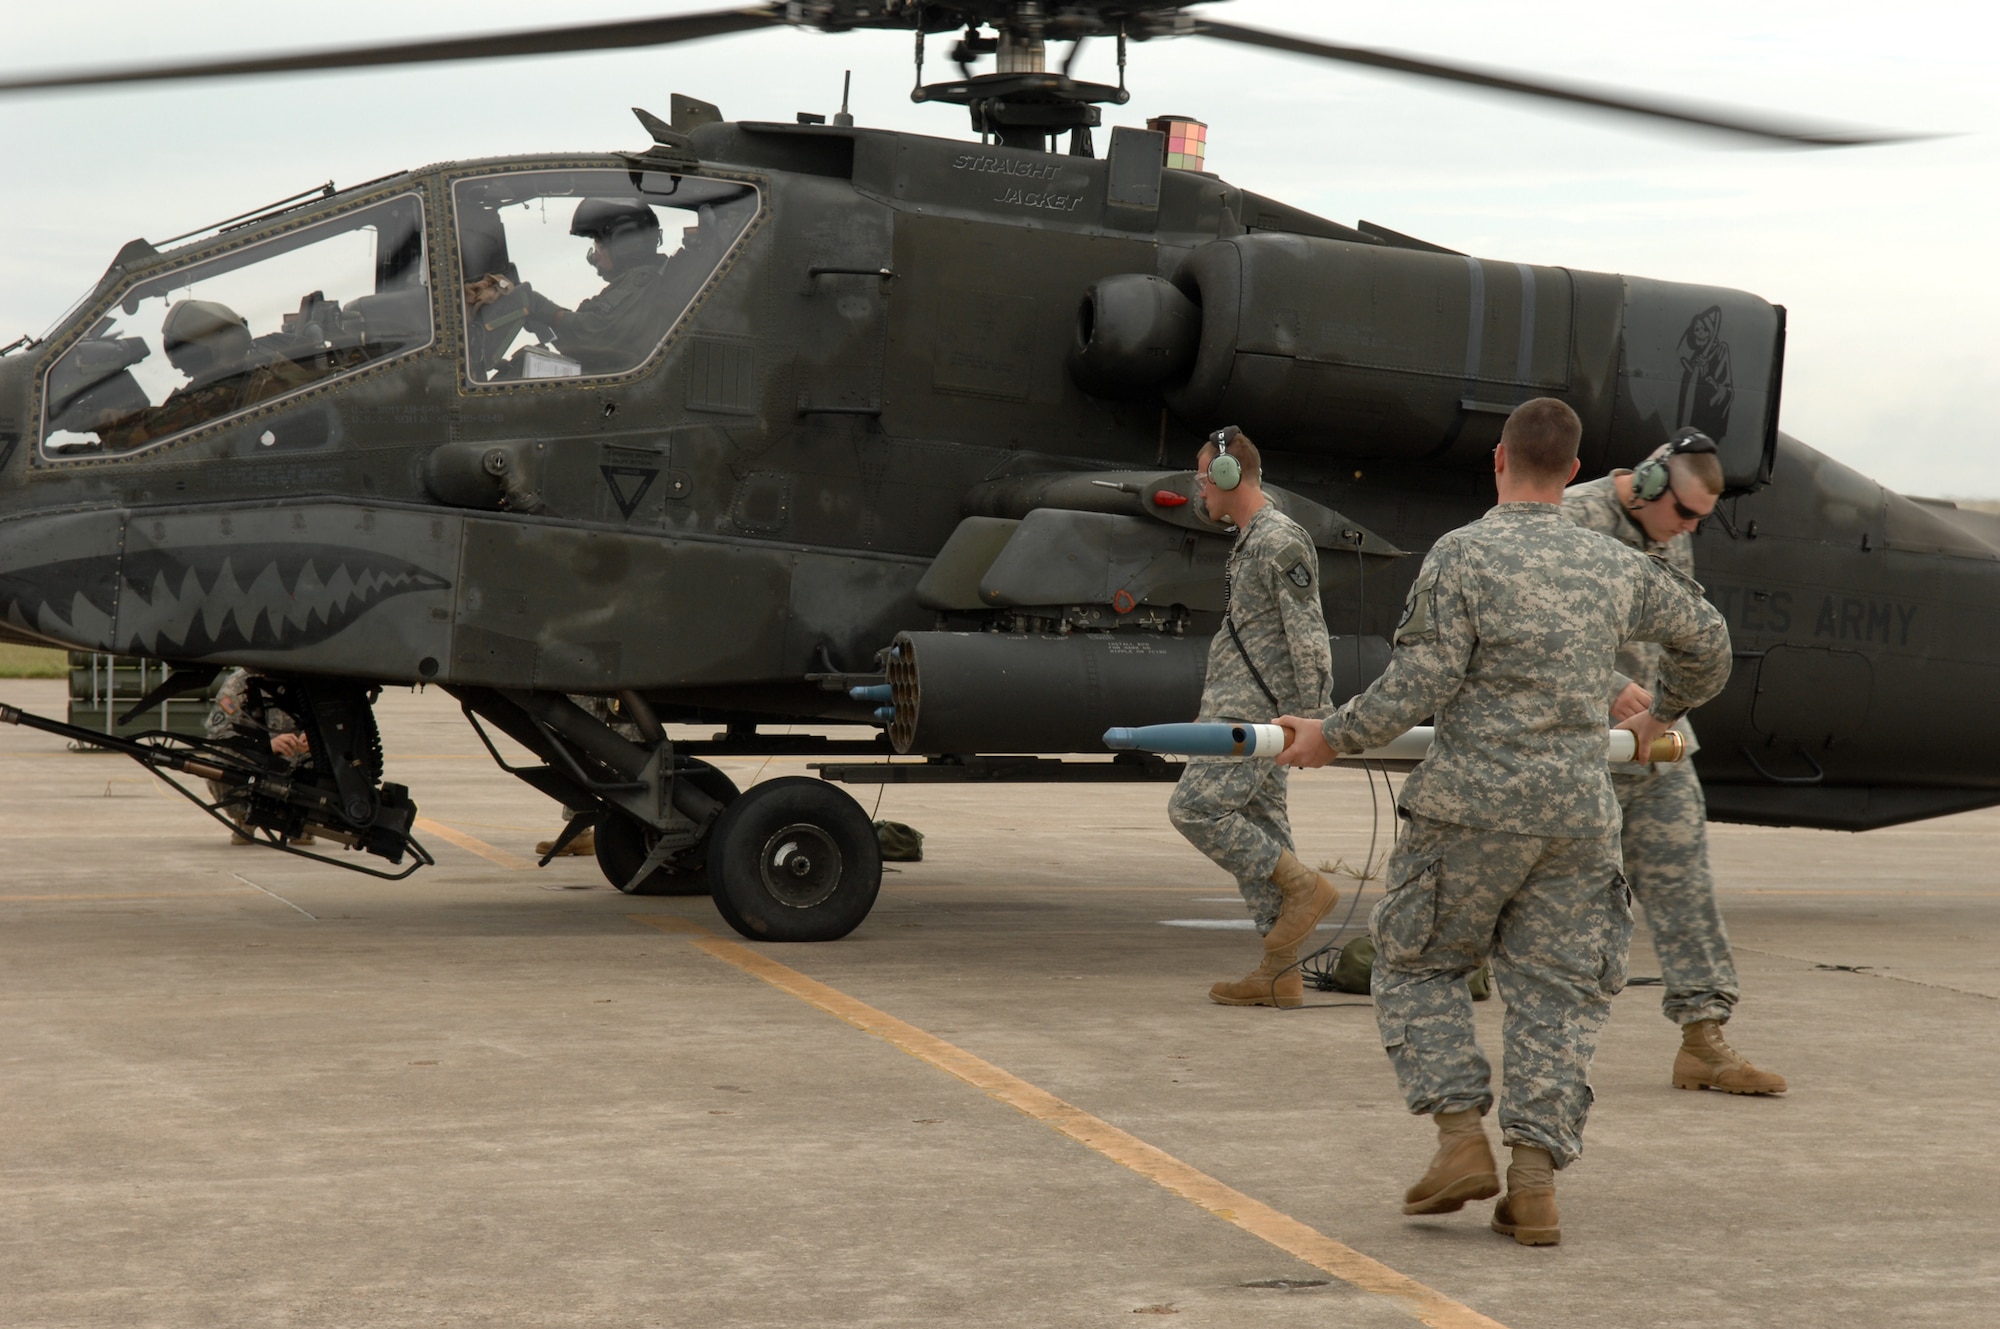 WHITEMAN AIR FORCE BASE, Mo. – Army Sgts.Chistopher Lorey, Brian Pummill and David Ezell, all from the 1-135th Attack Recon Battalion, load 2.76 inch rockets on an AH-64A Apache Sept. 6. The Missouri Army National Guard’s 1-135th Attack Recon Battalion recently implemented a new training program that allows pilots to arm and fly three AH-64 Apache helicopters from Whiteman AFB to Fort Leonard Wood for the first time to practice aerial gunnery at their monthly drill. (U.S. Air Force photo/Senior Airman Stephen Linch)